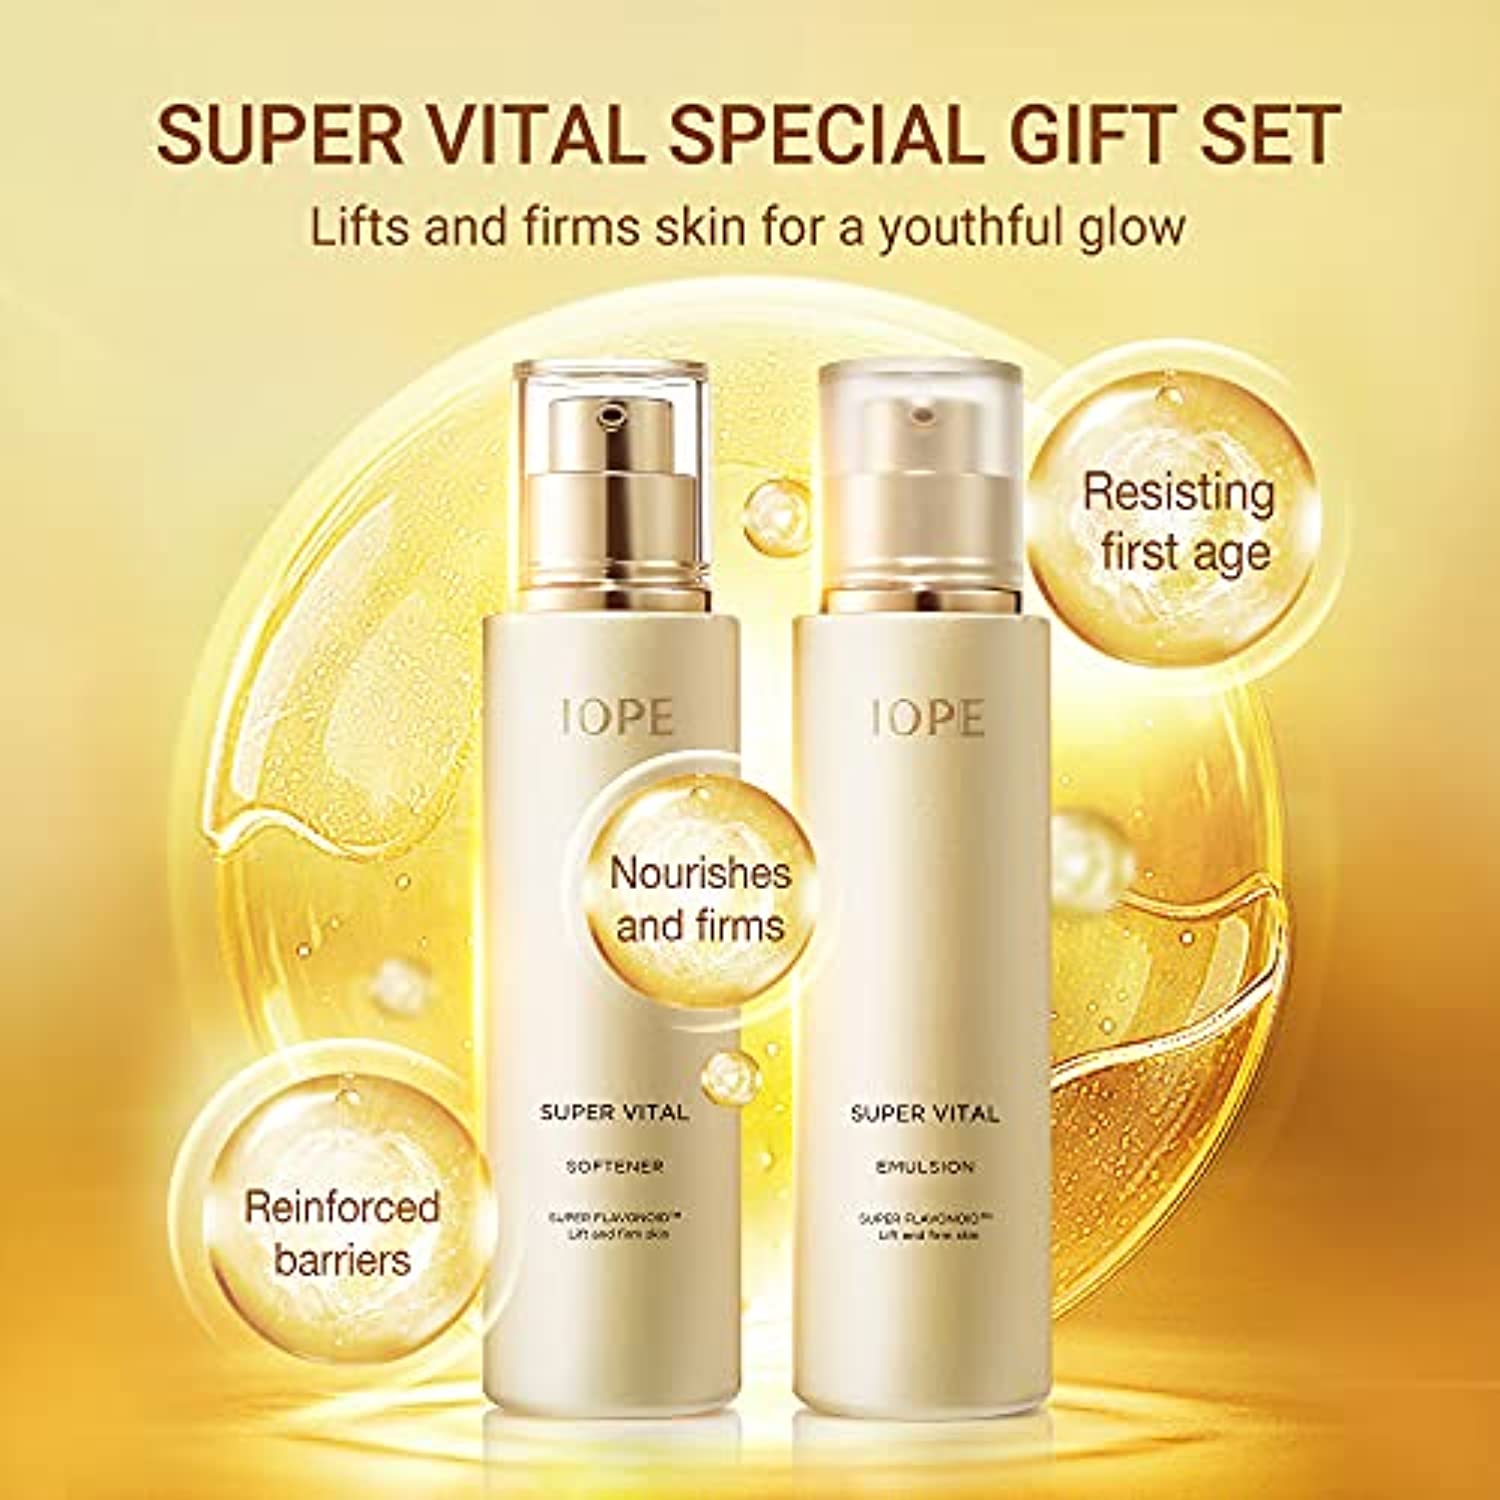 IOPE Super Vital Skincare 2pcs Set- Facial Toner & Emulsion with Mini-Cream - Daily Treatment for All Skin - for Lifting & Hydrating Without Paraben by Amorepacific